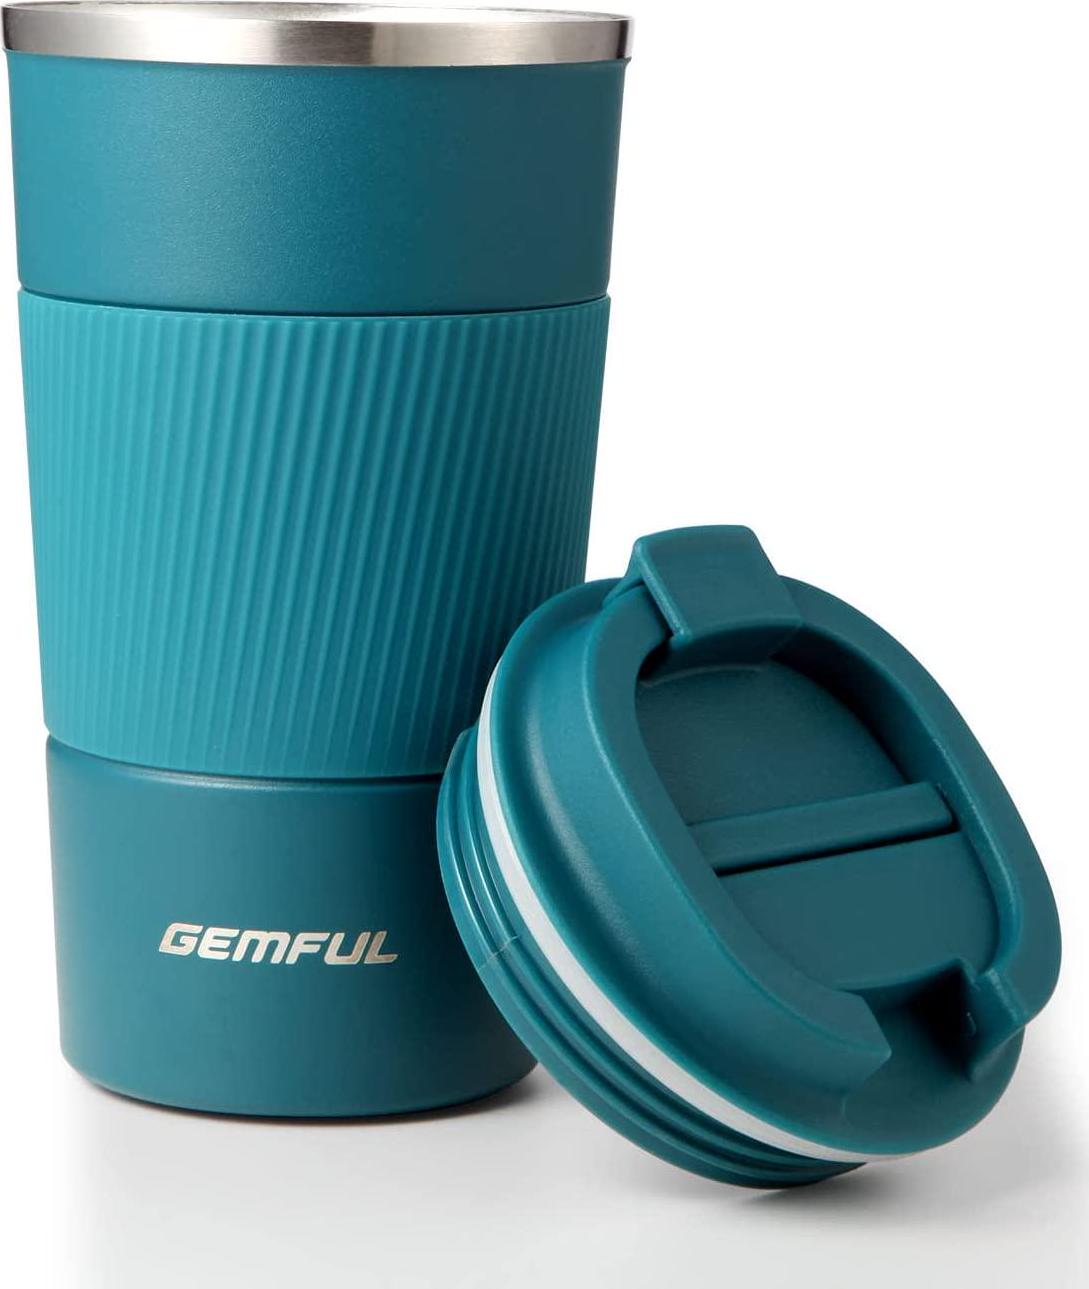 GEMFUL, GEMFUL 18oz Travel Coffee Mug with Lid Insulated for Home Office Outdoor Works